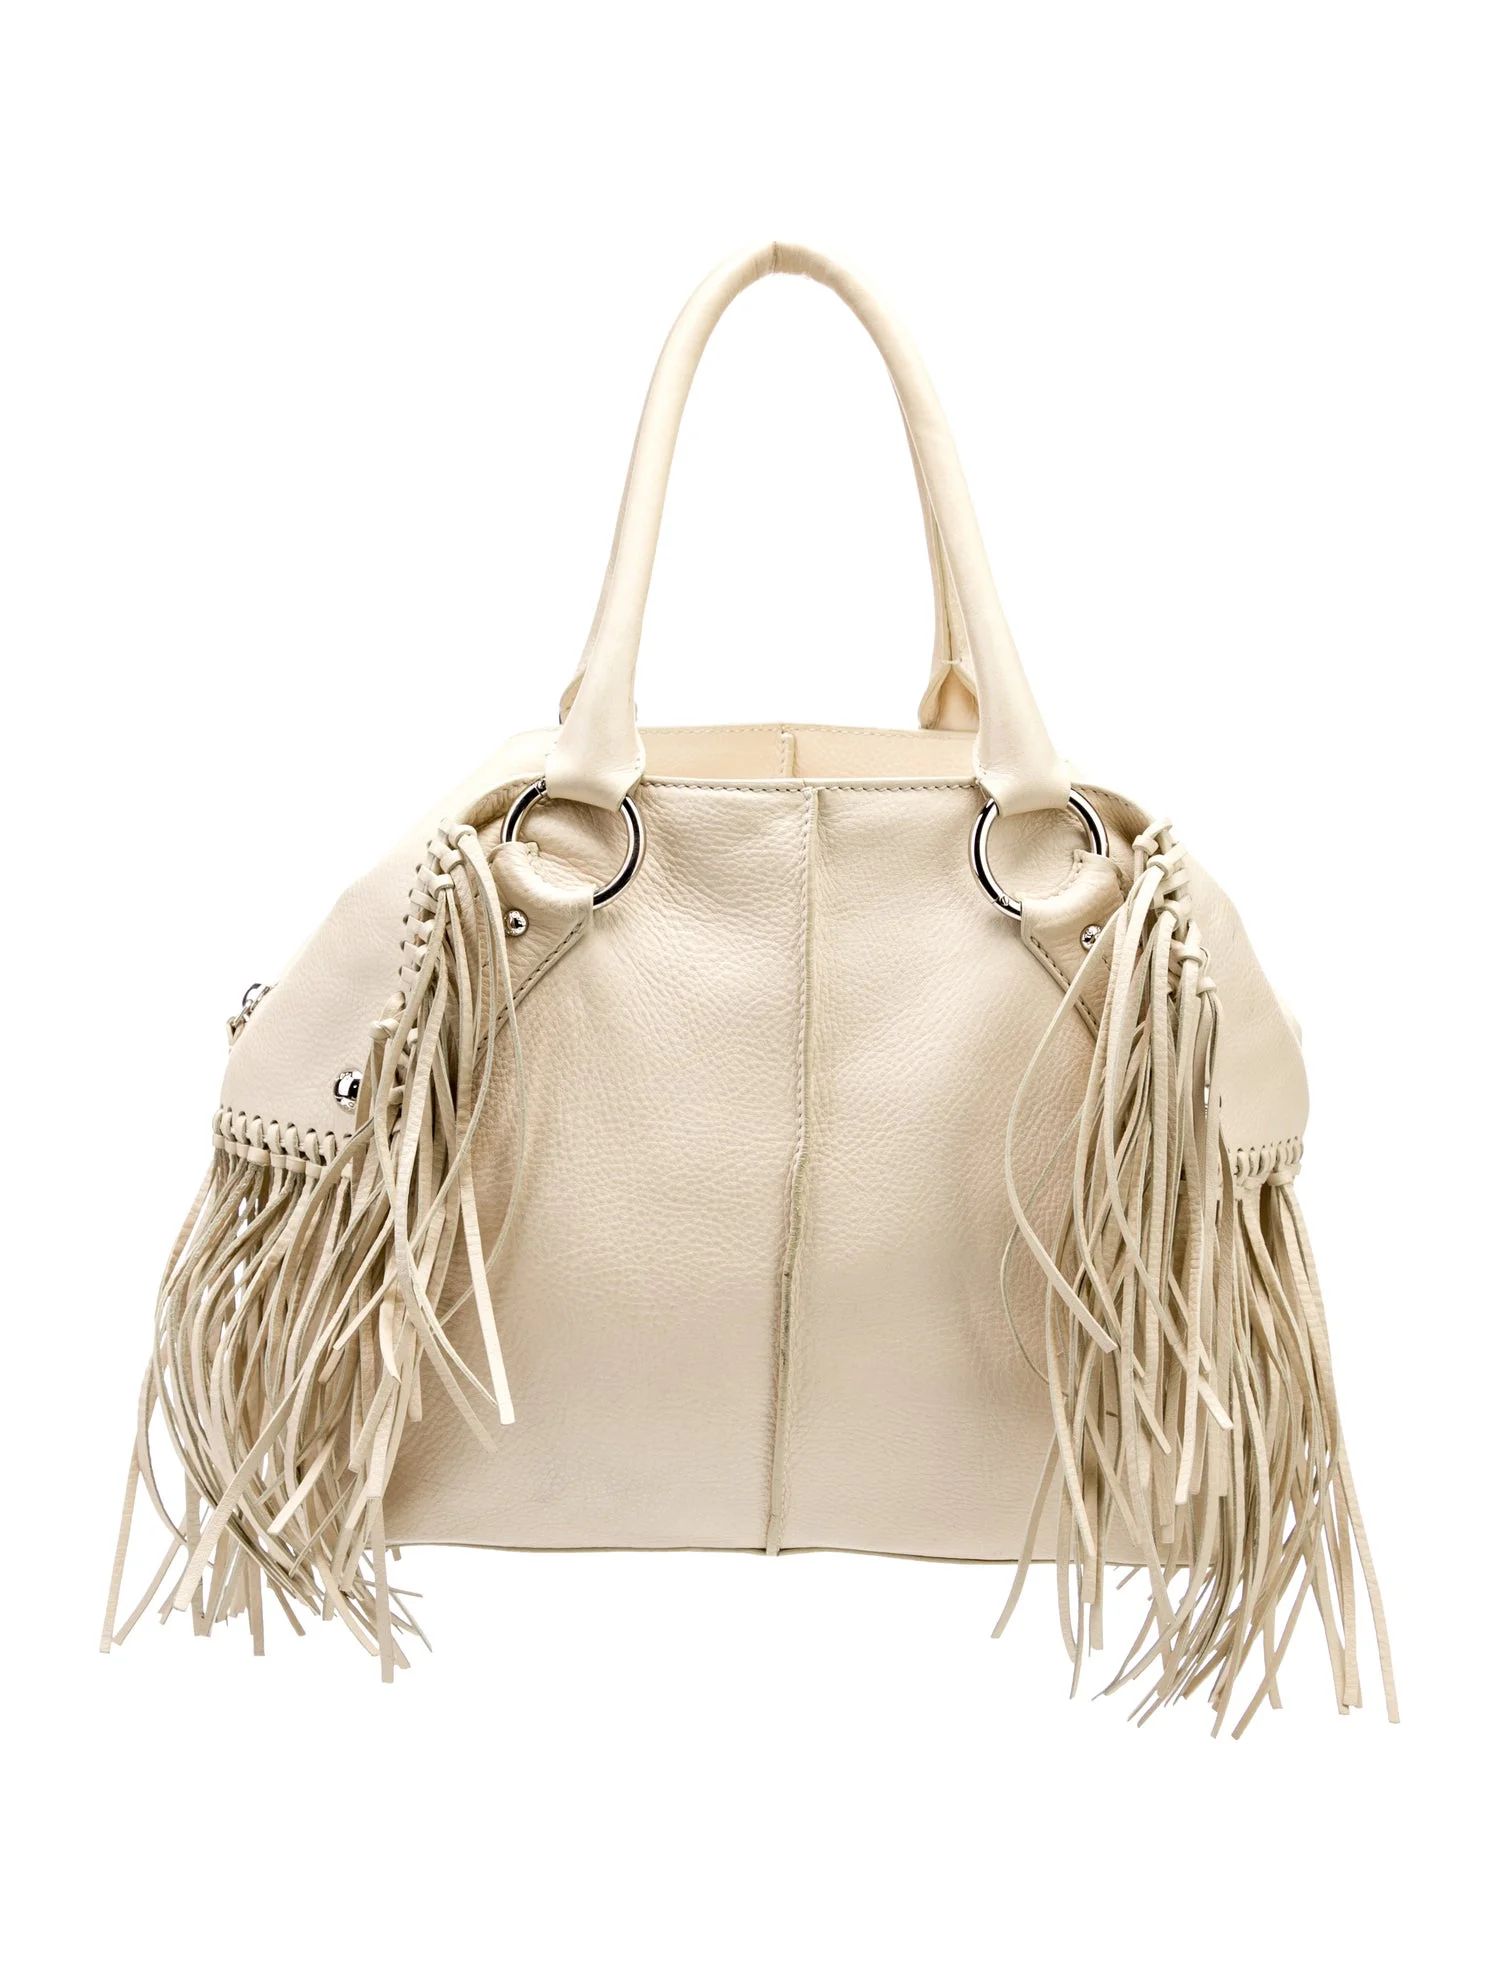 Fringed Leather Tote Bag | The RealReal